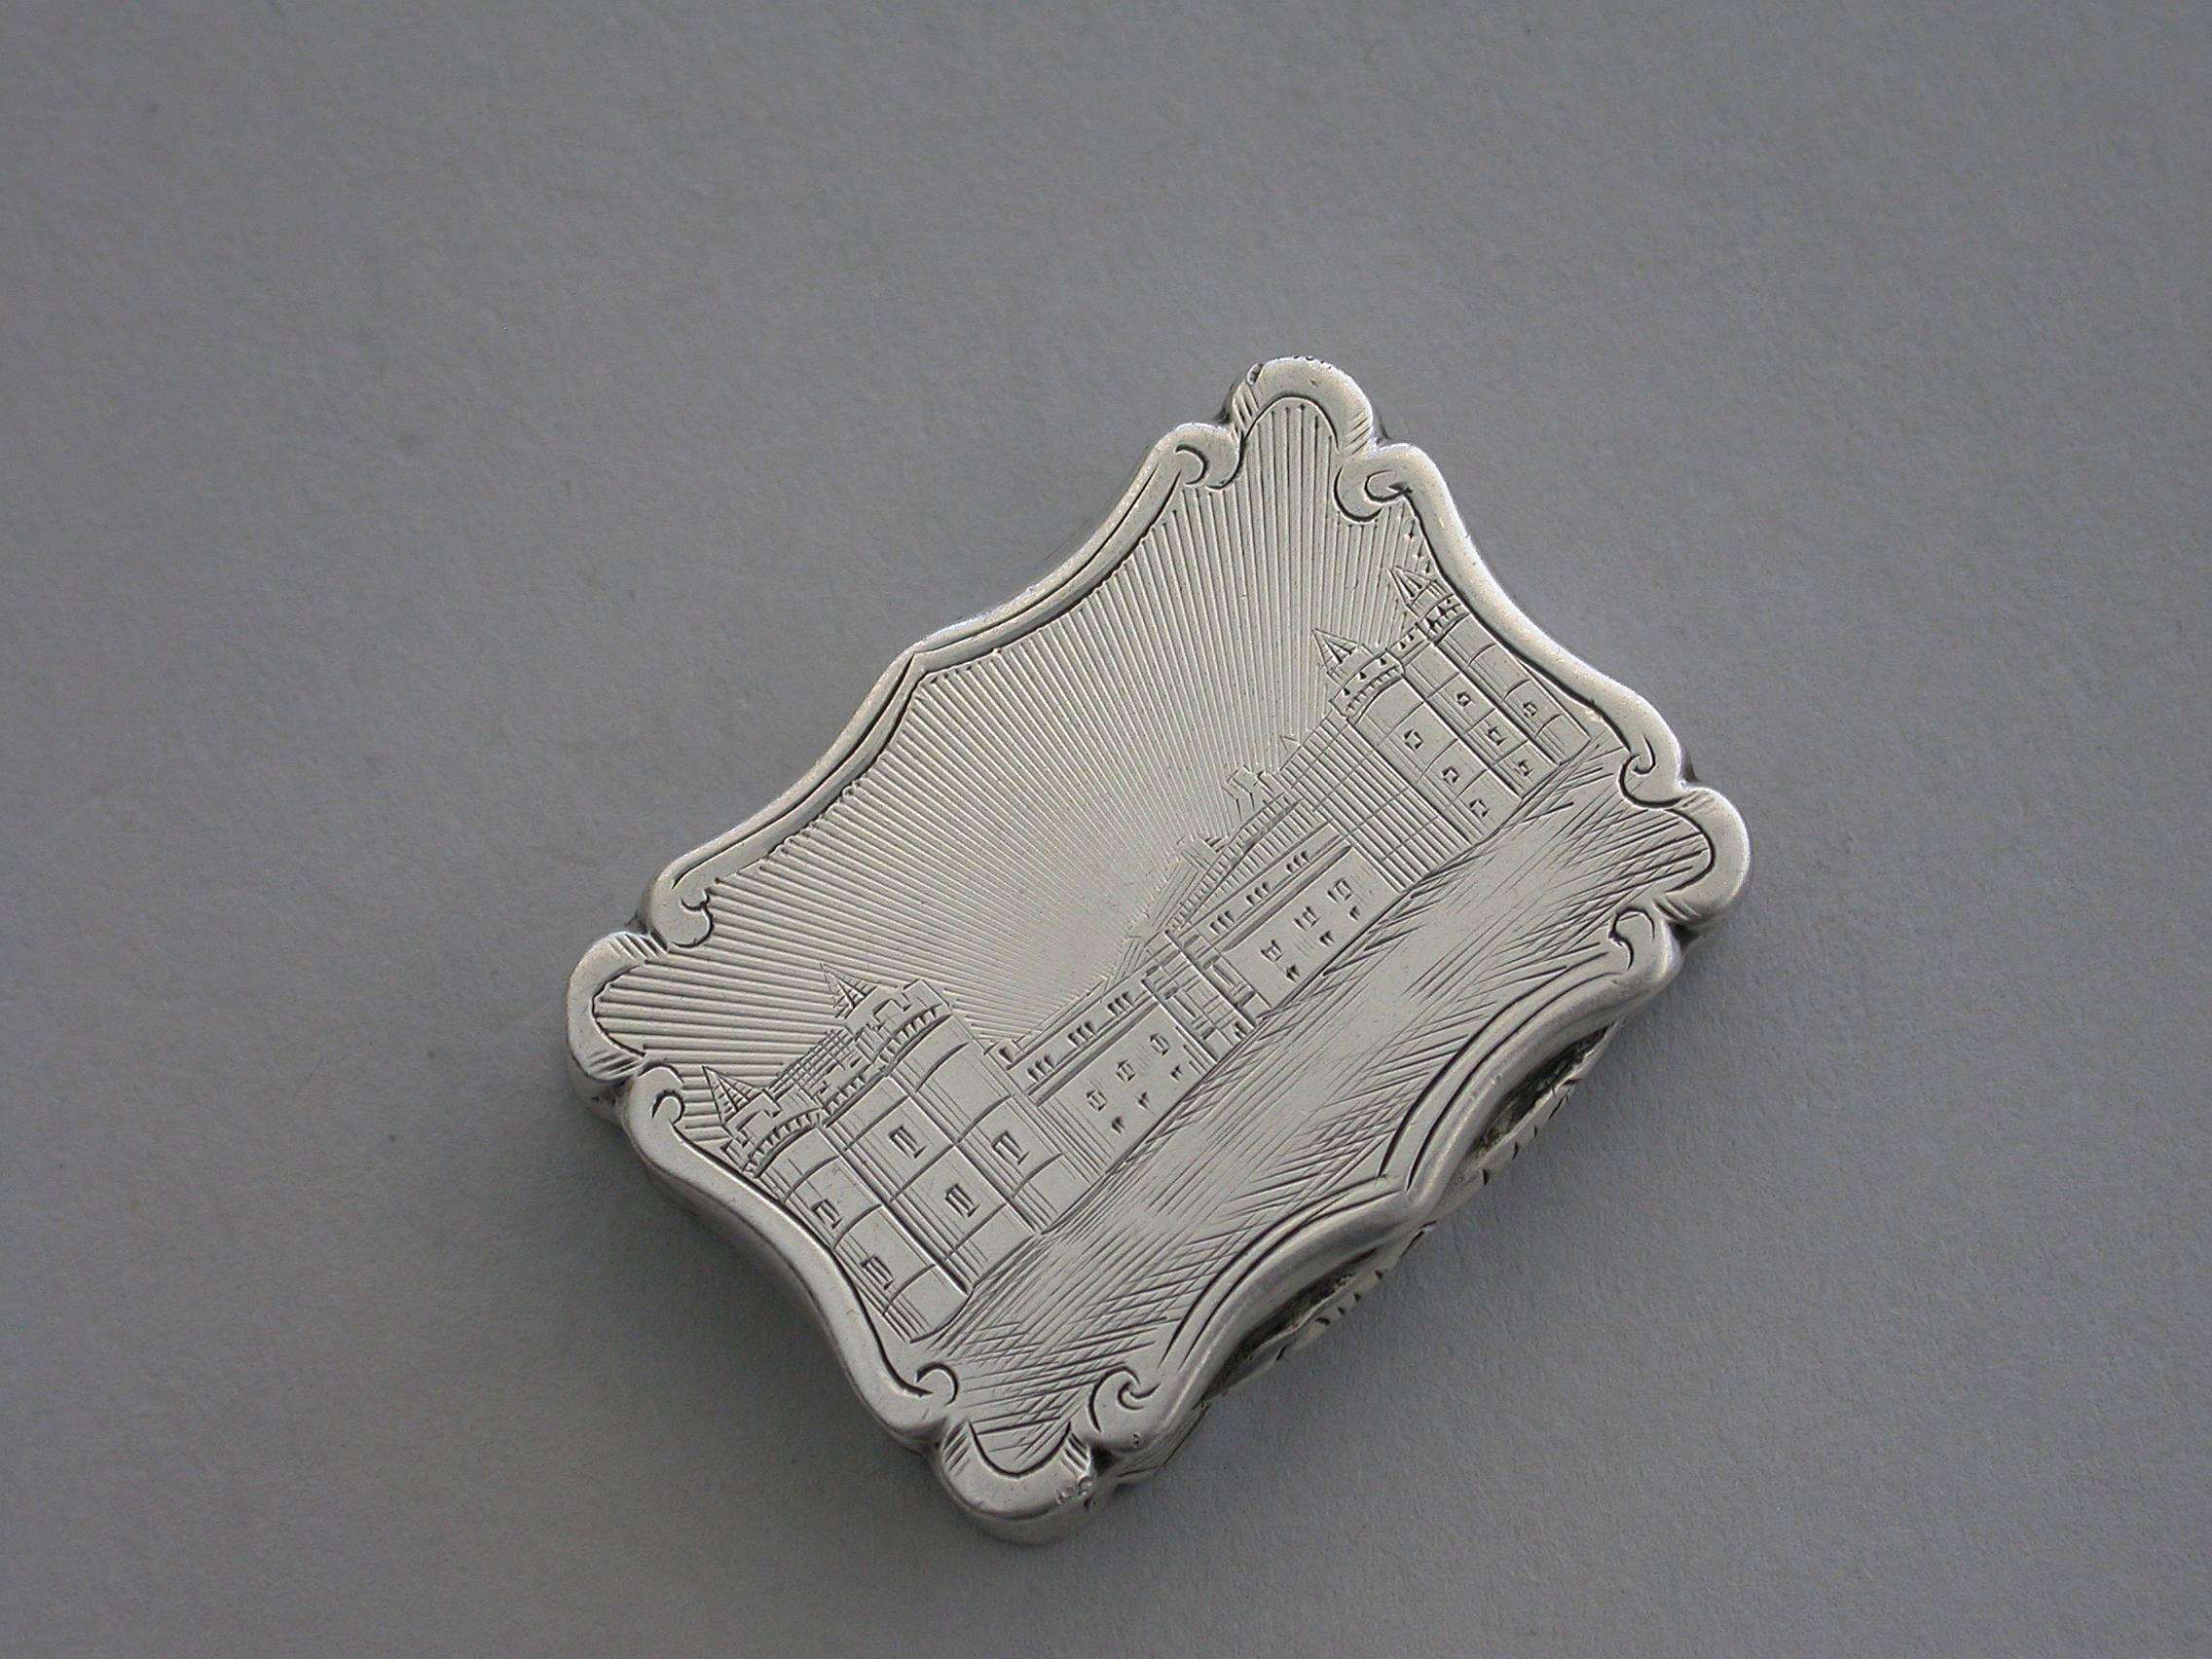 A rare Victorian silver Vinaigrette of shaped rectangular form, the base and sides with bands of engine turned decoration and a vacant shaped cartouche. The lid engraved with a scene depicting Holyrood House in Edinburgh, Scotland. The silver gilt